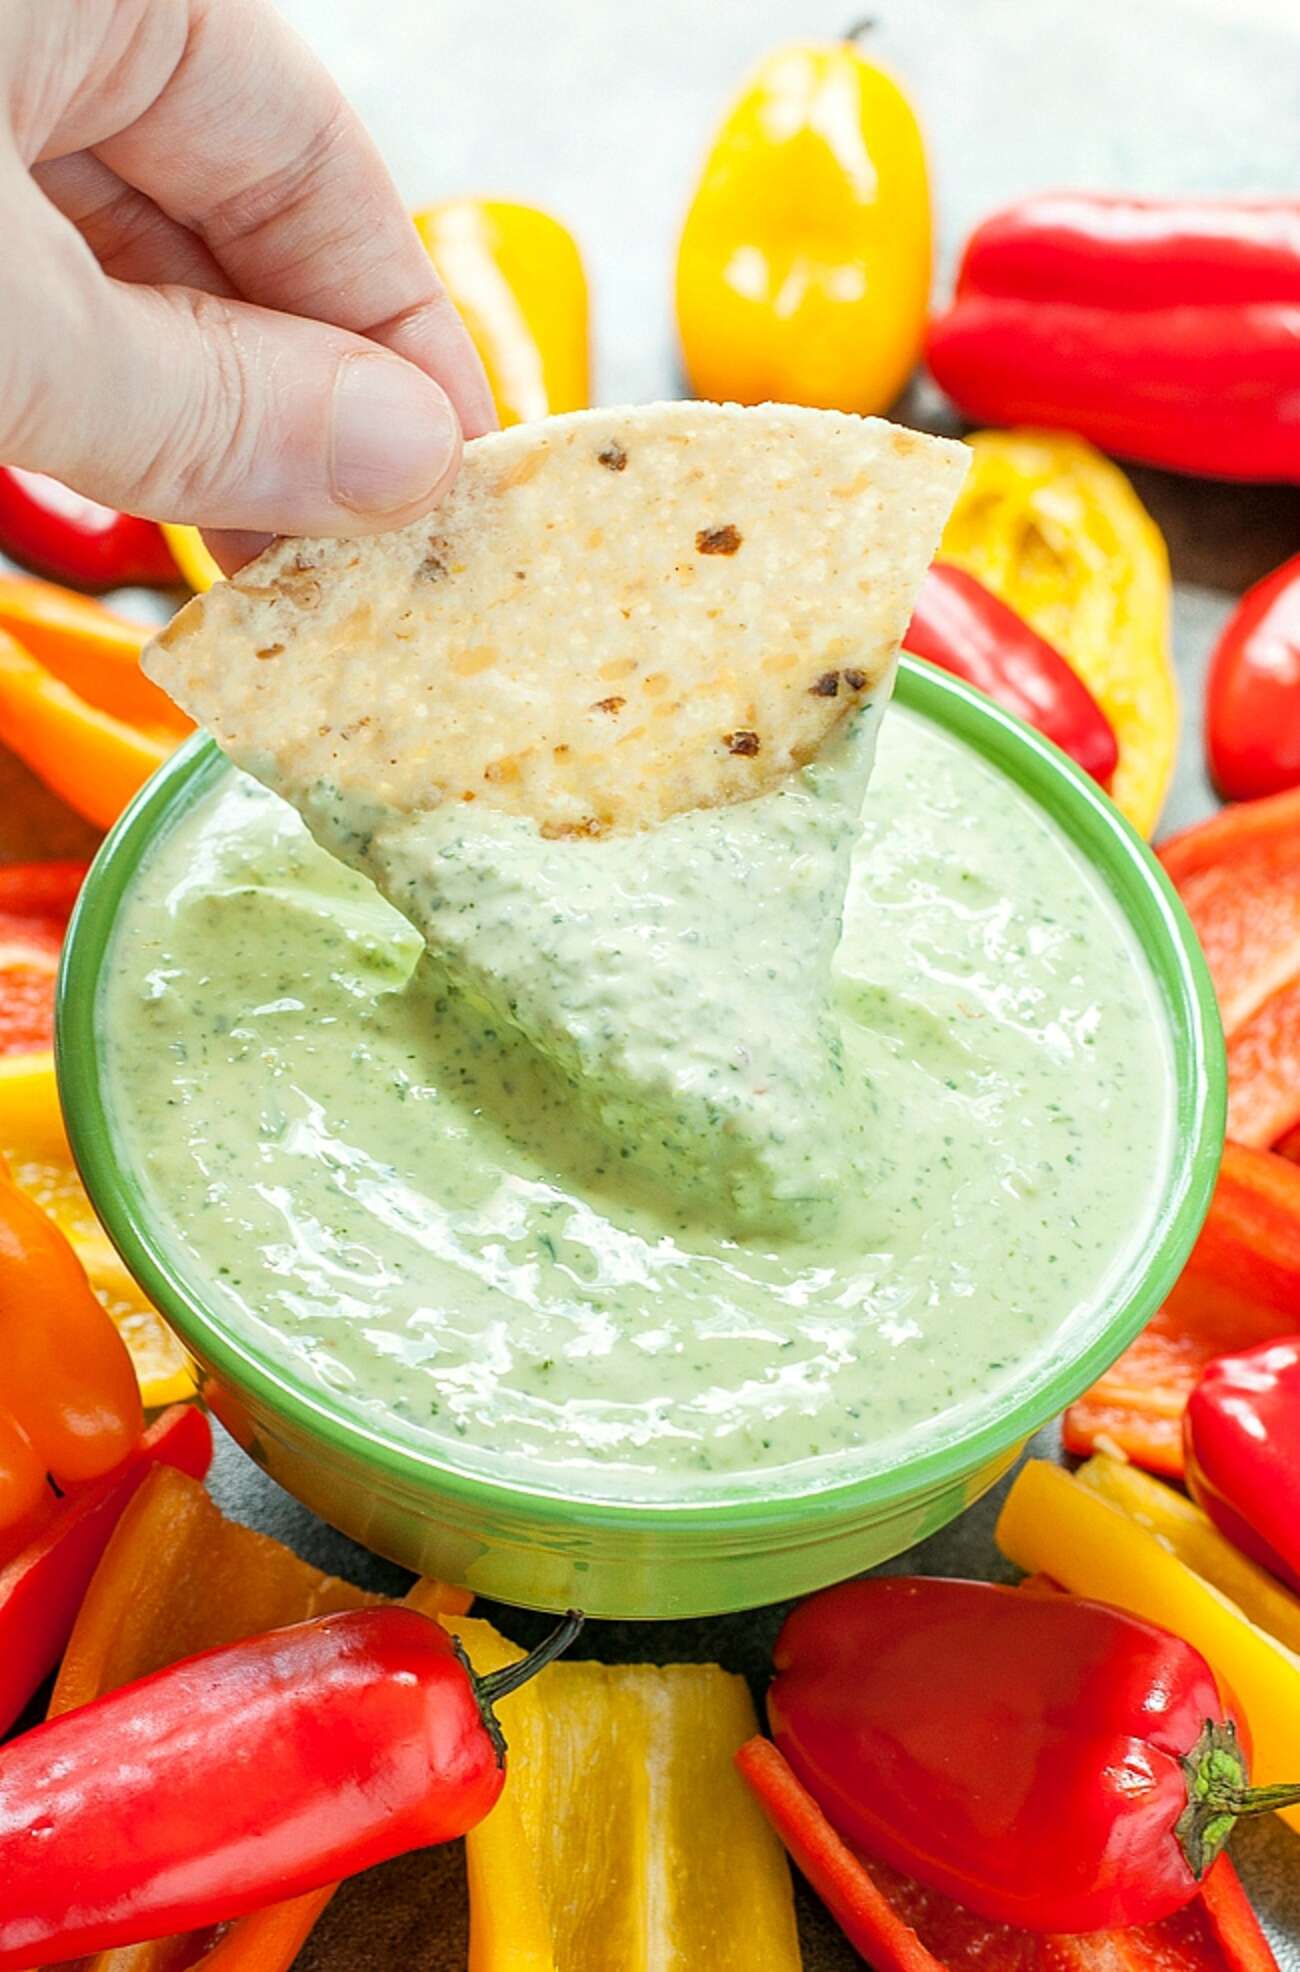 10 Party Dip Recipes Ready in 5 Minutes - Thrillist